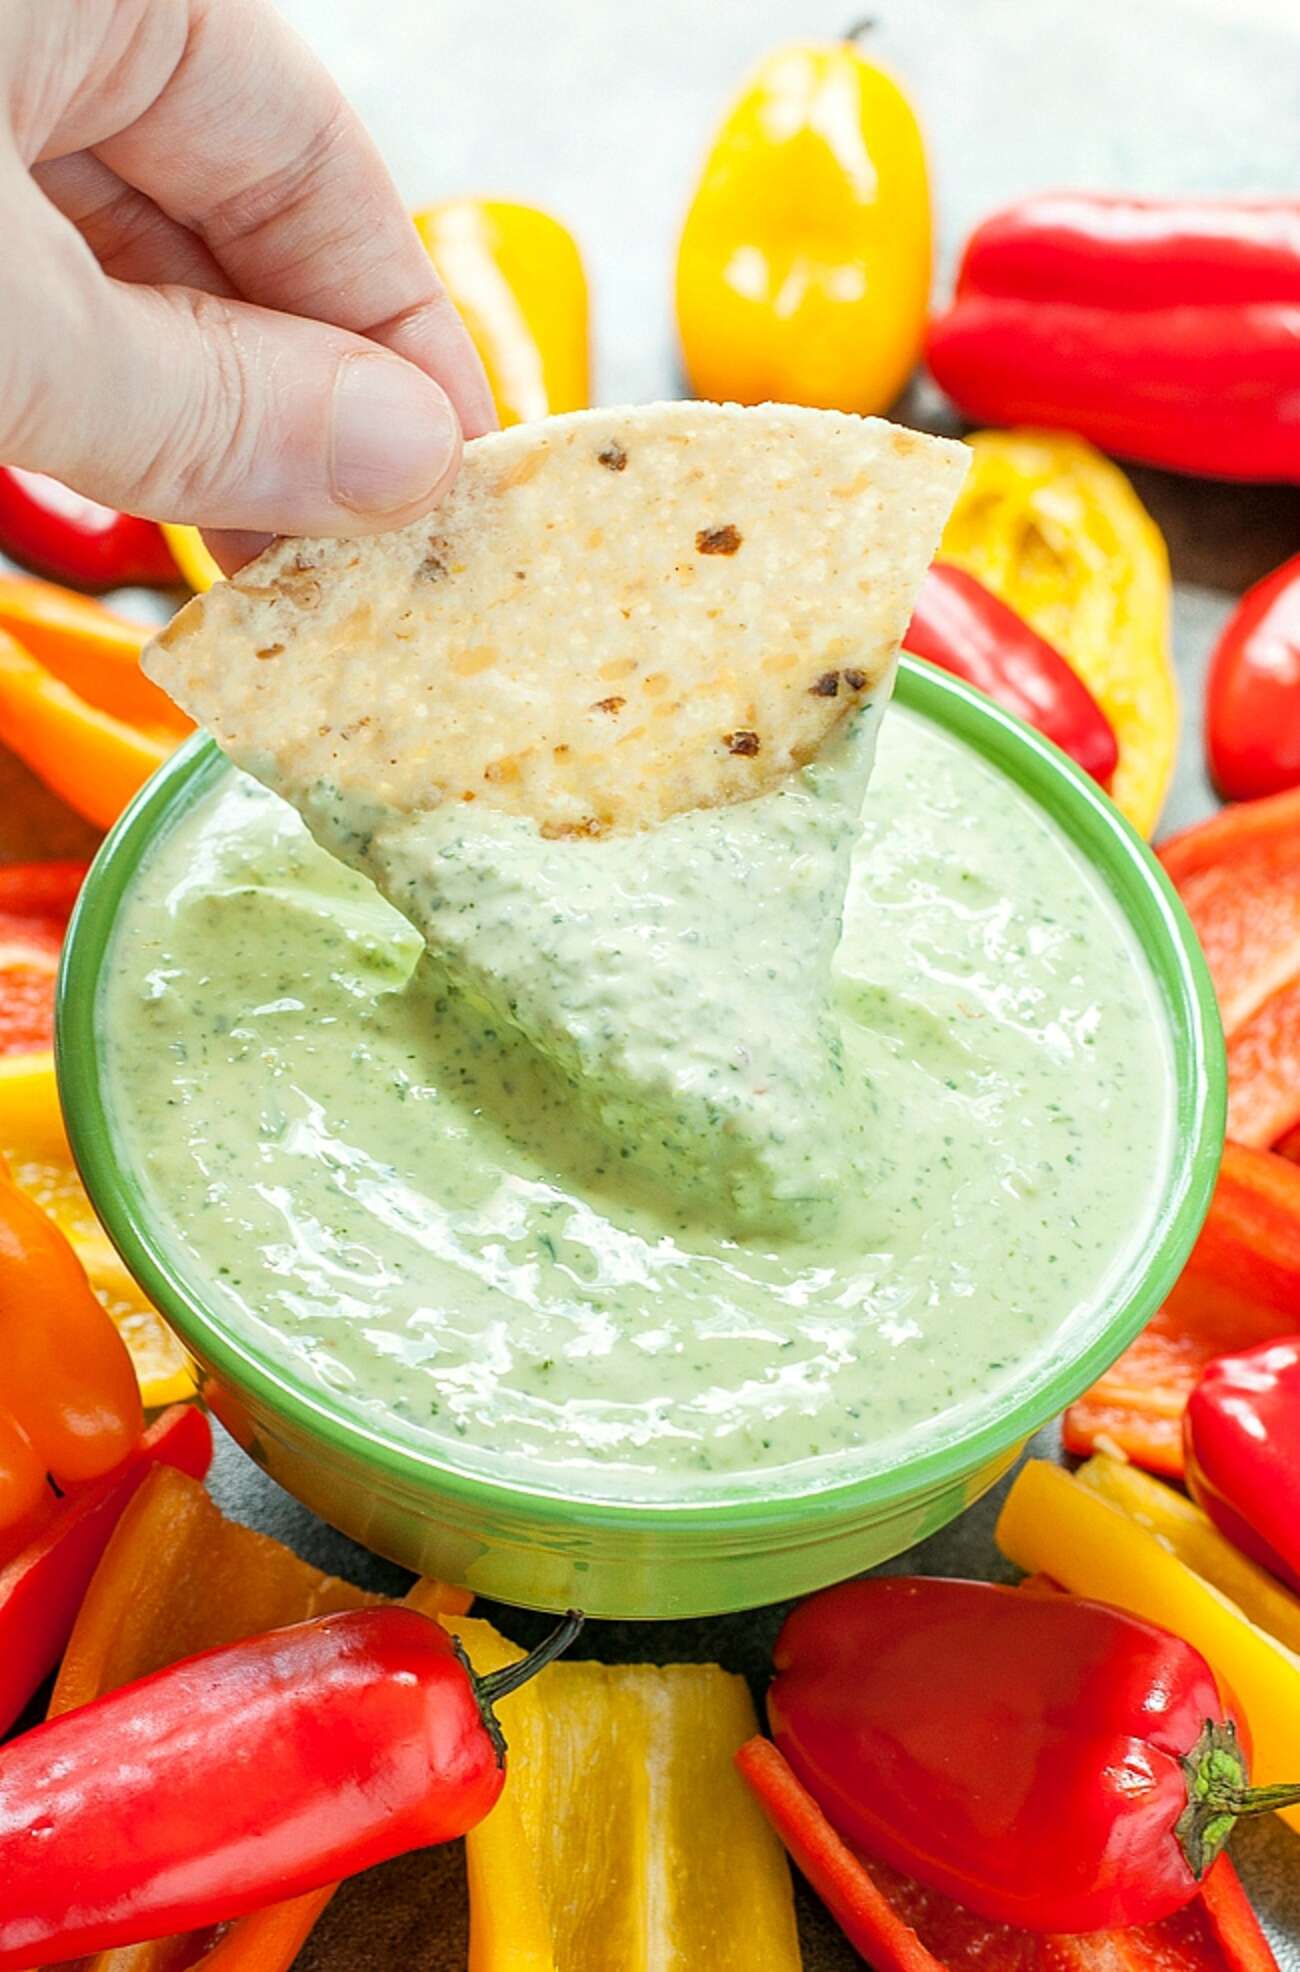 10 Party Dip Recipes Ready in 5 Minutes - Thrillist